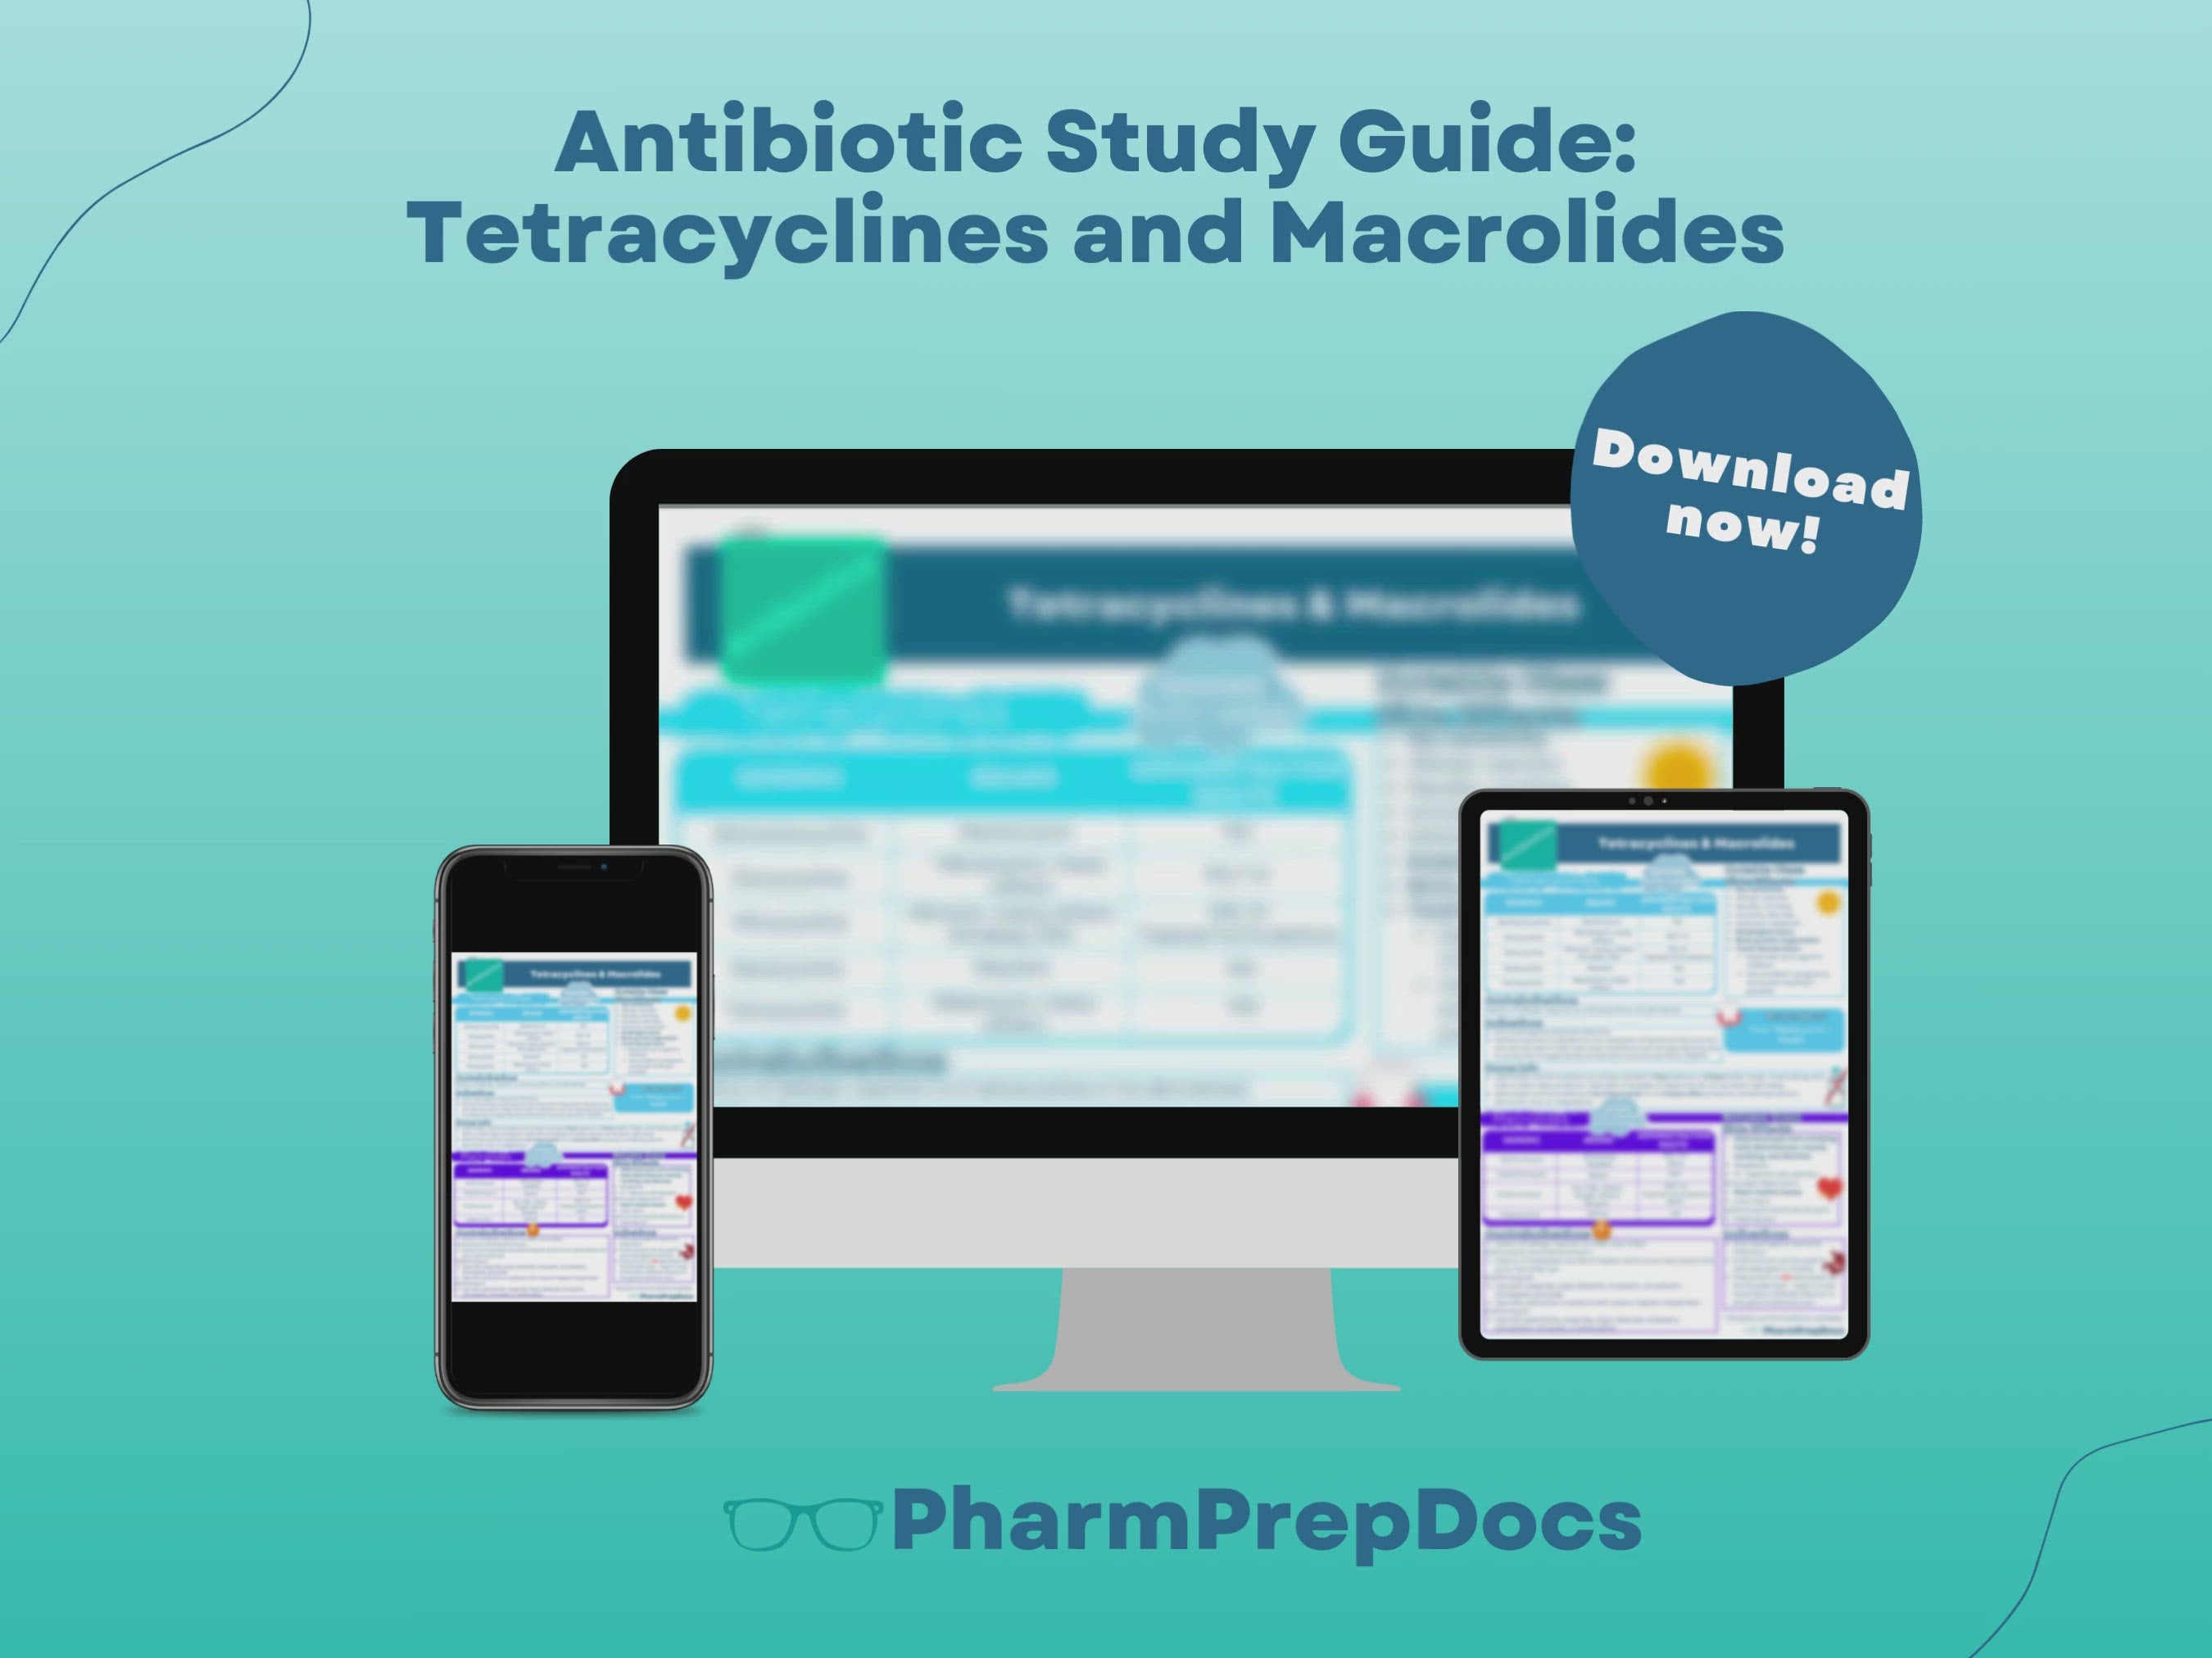 Antibiotic Study Guide: Tetracyclines and Macrolides